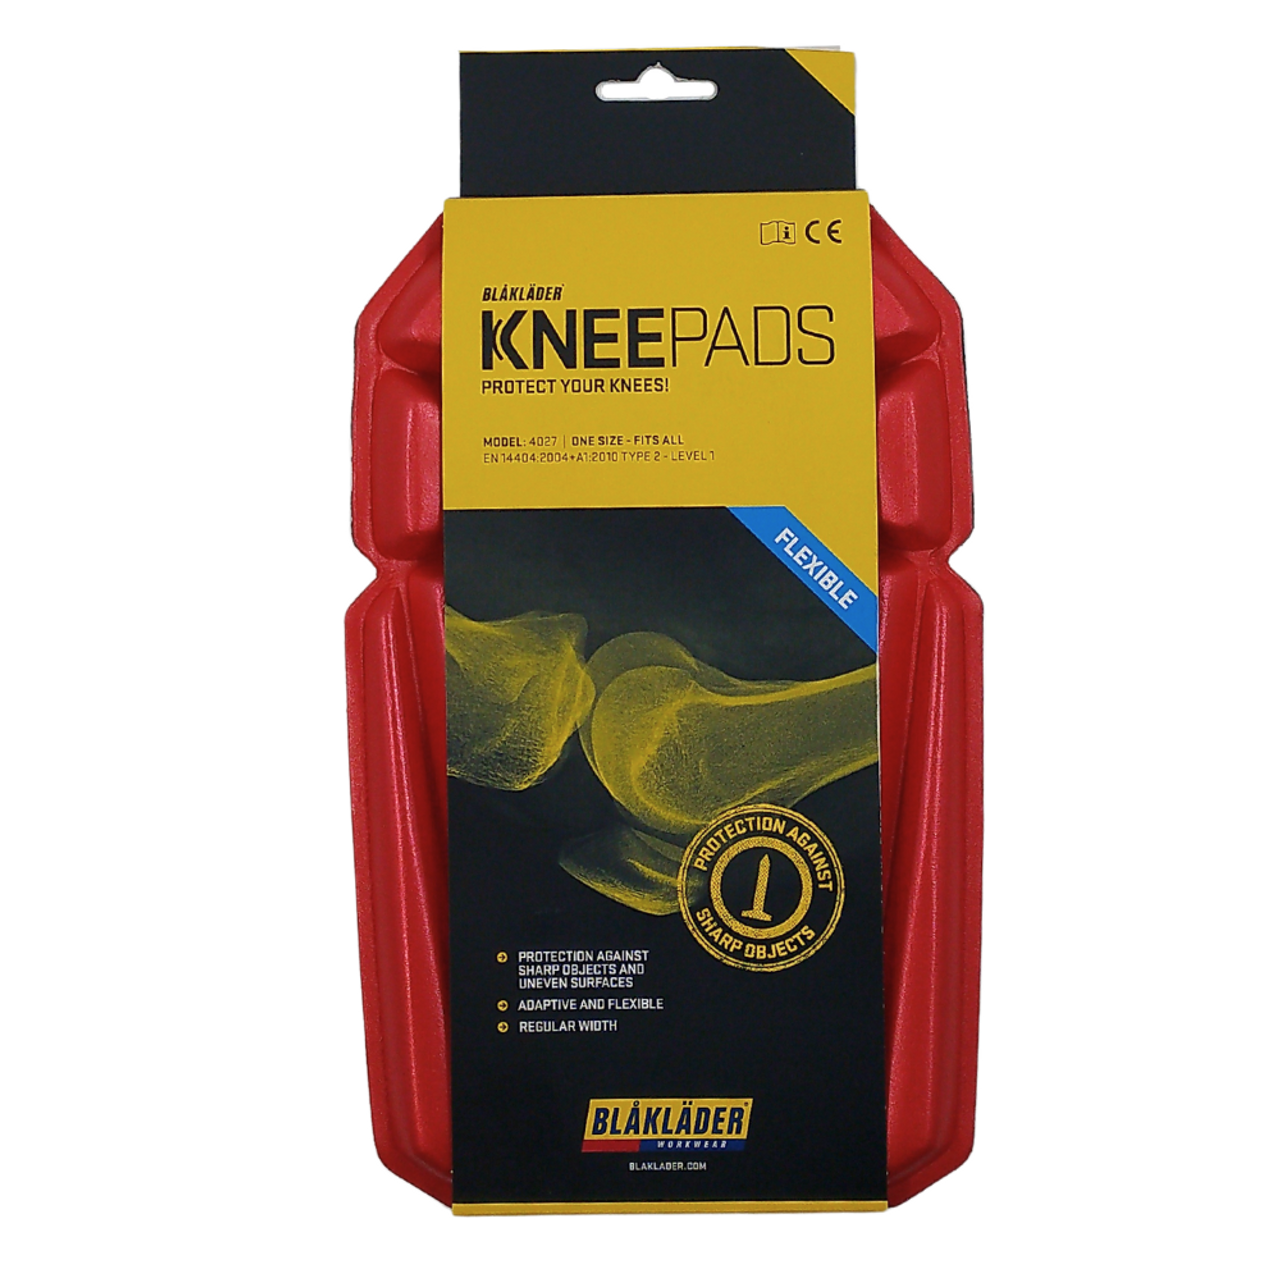 kneepads for mens trousers and work trousers